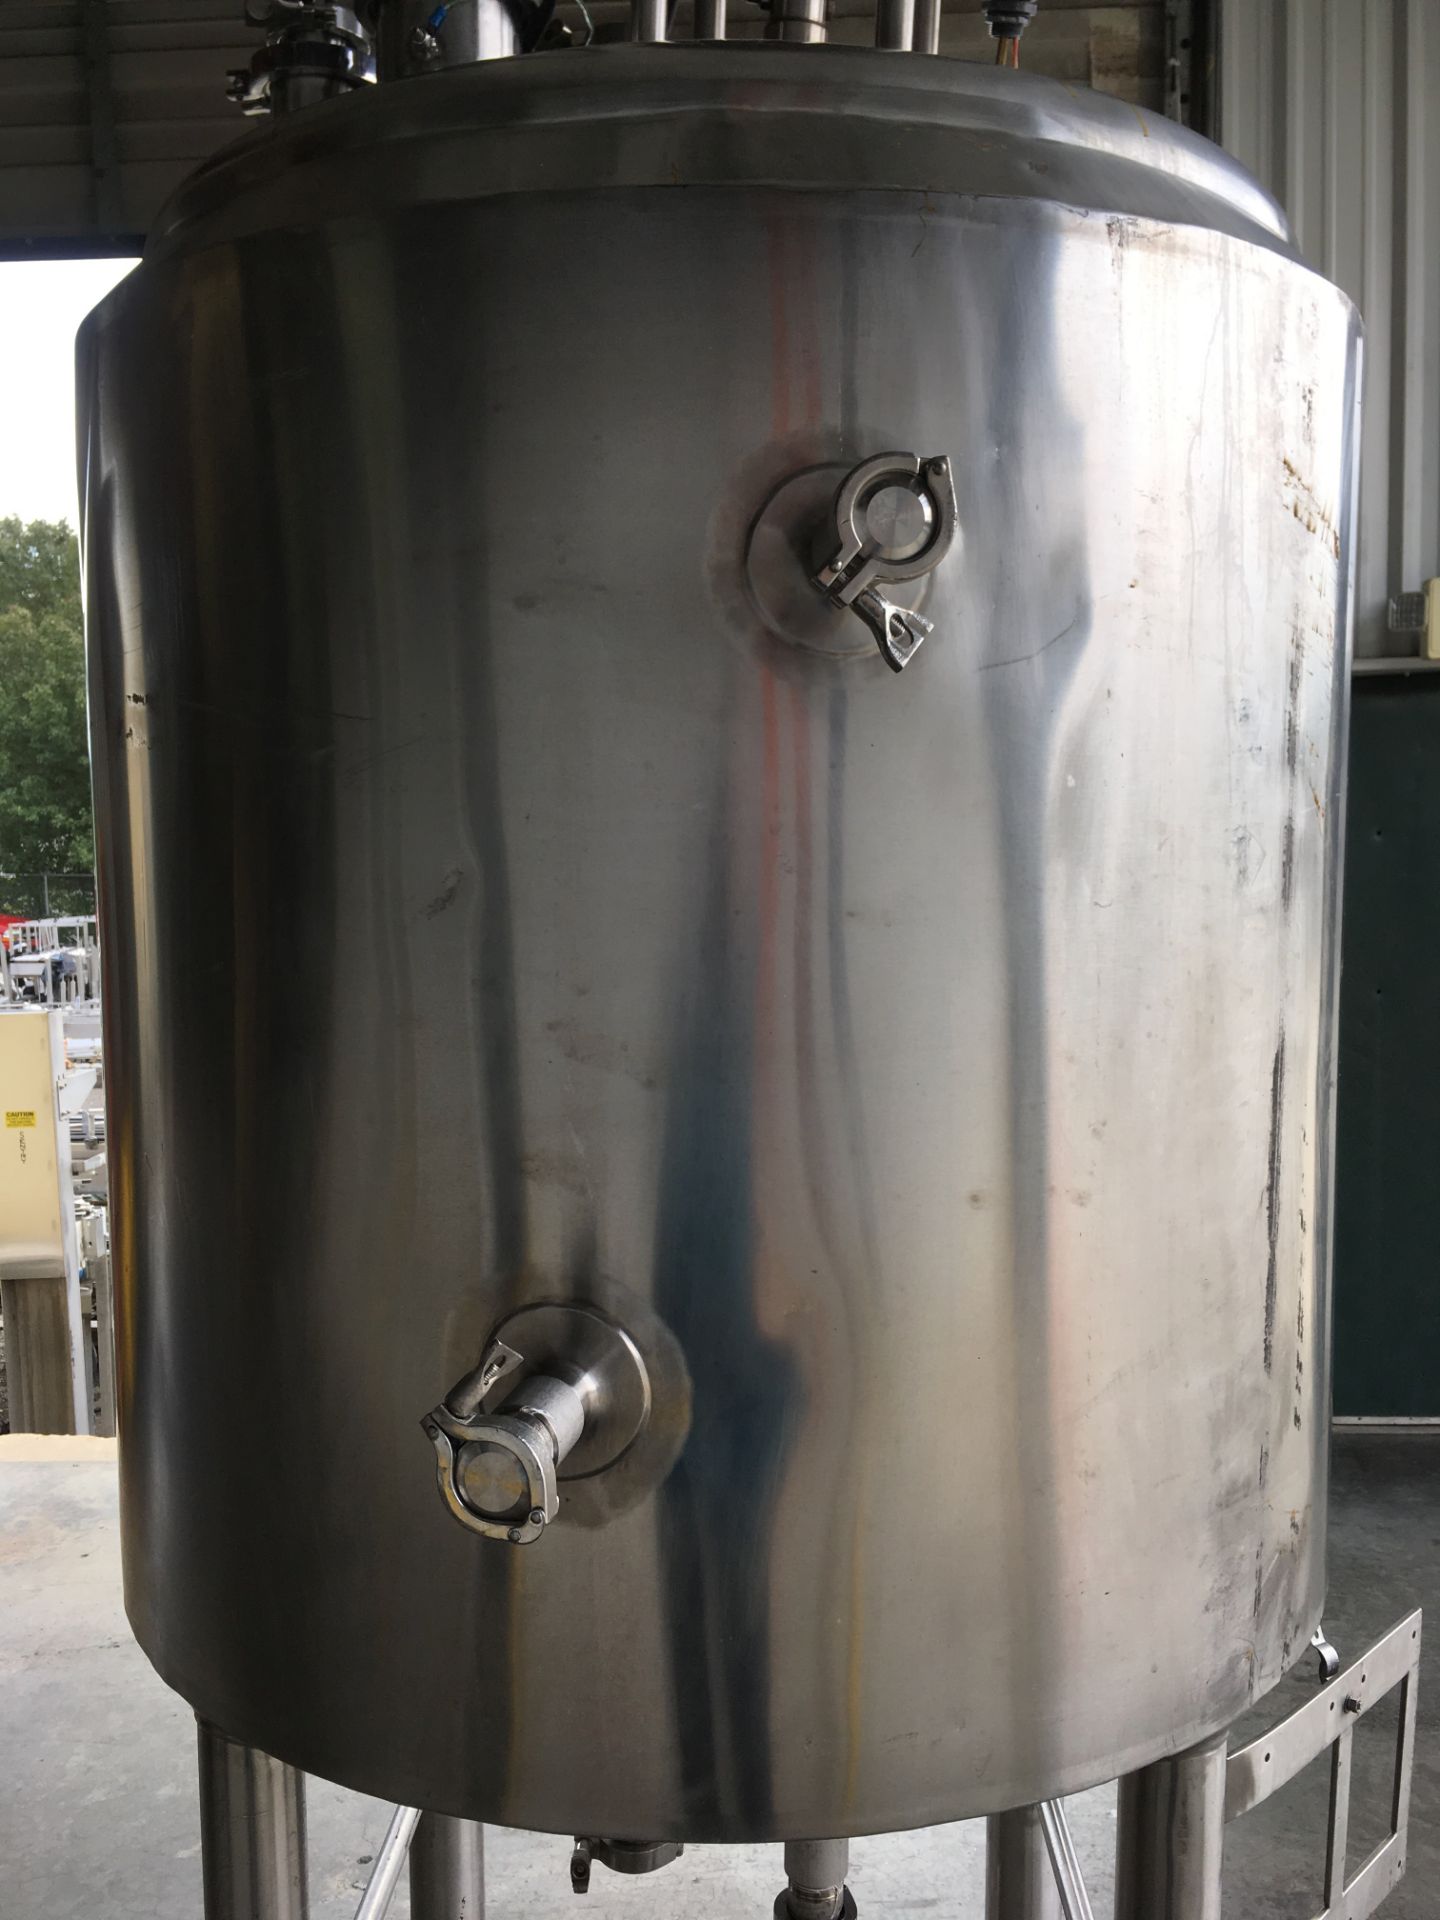 200 Gallon Stainless Steel Jacketed Tank with Top Mixer, Top Manhole, High Shear Mixer Blade, Baldor - Image 3 of 10